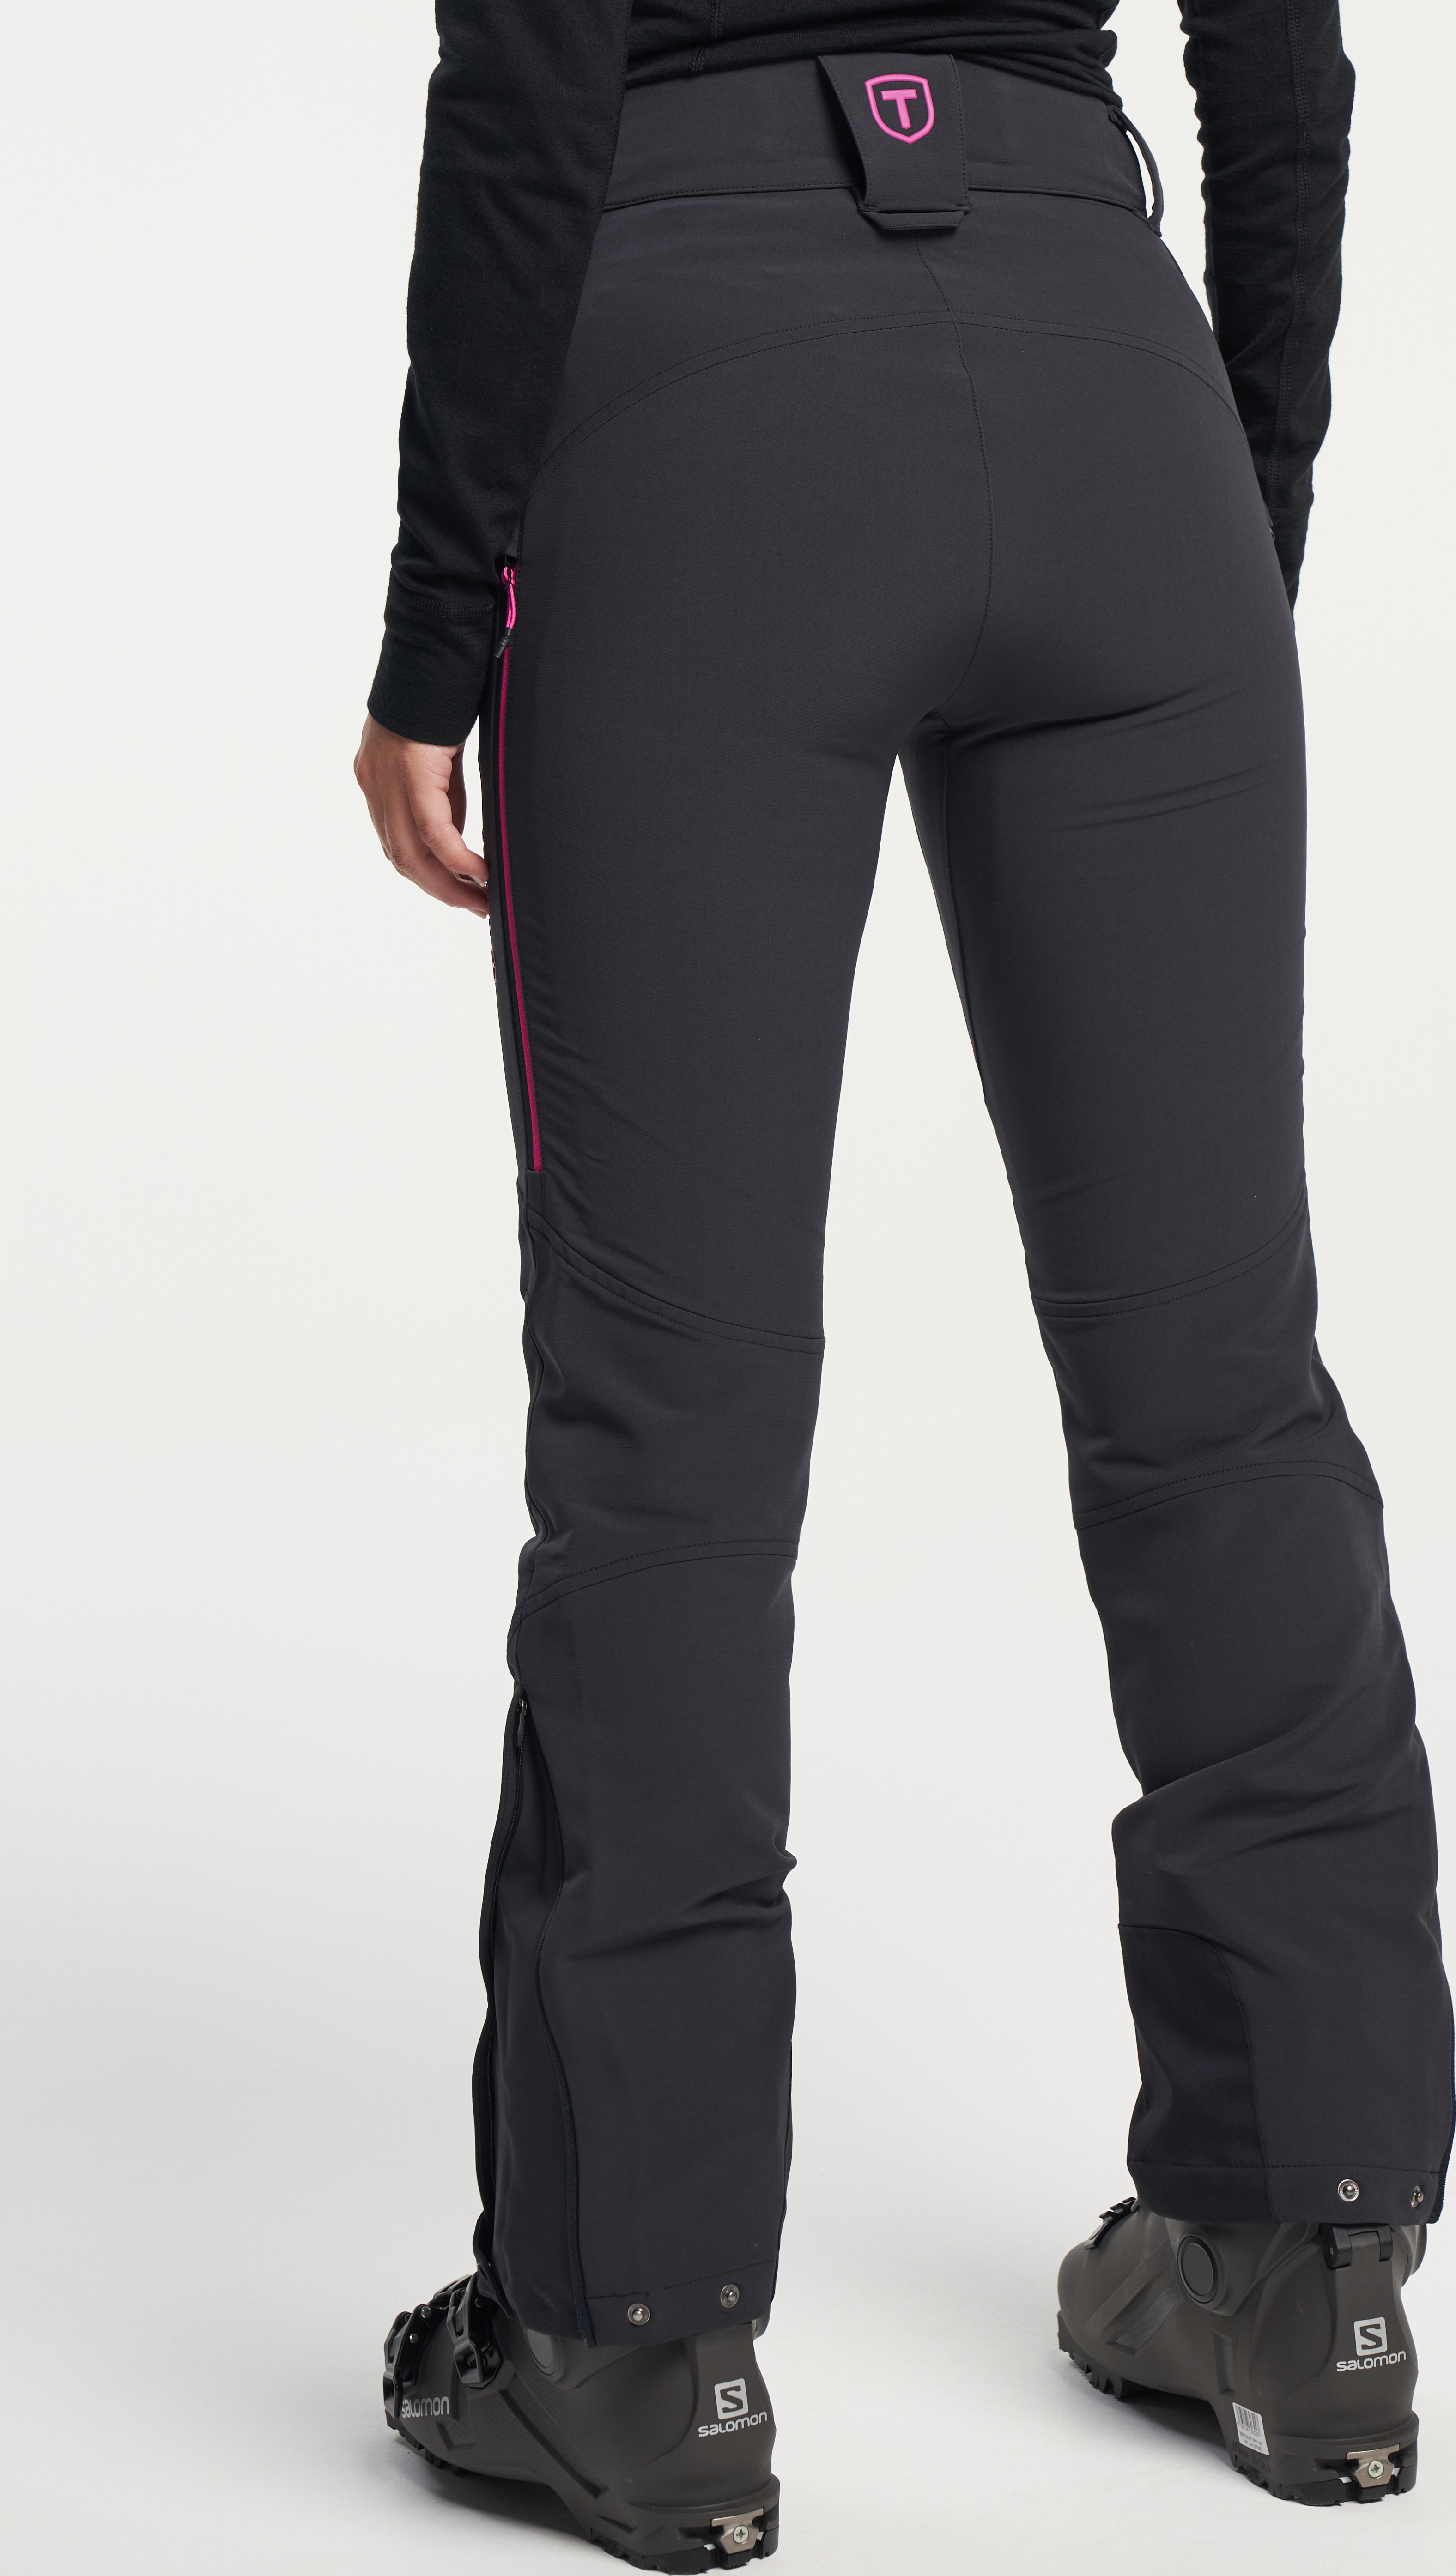 Women's Tour Softshell Pants Antracithe